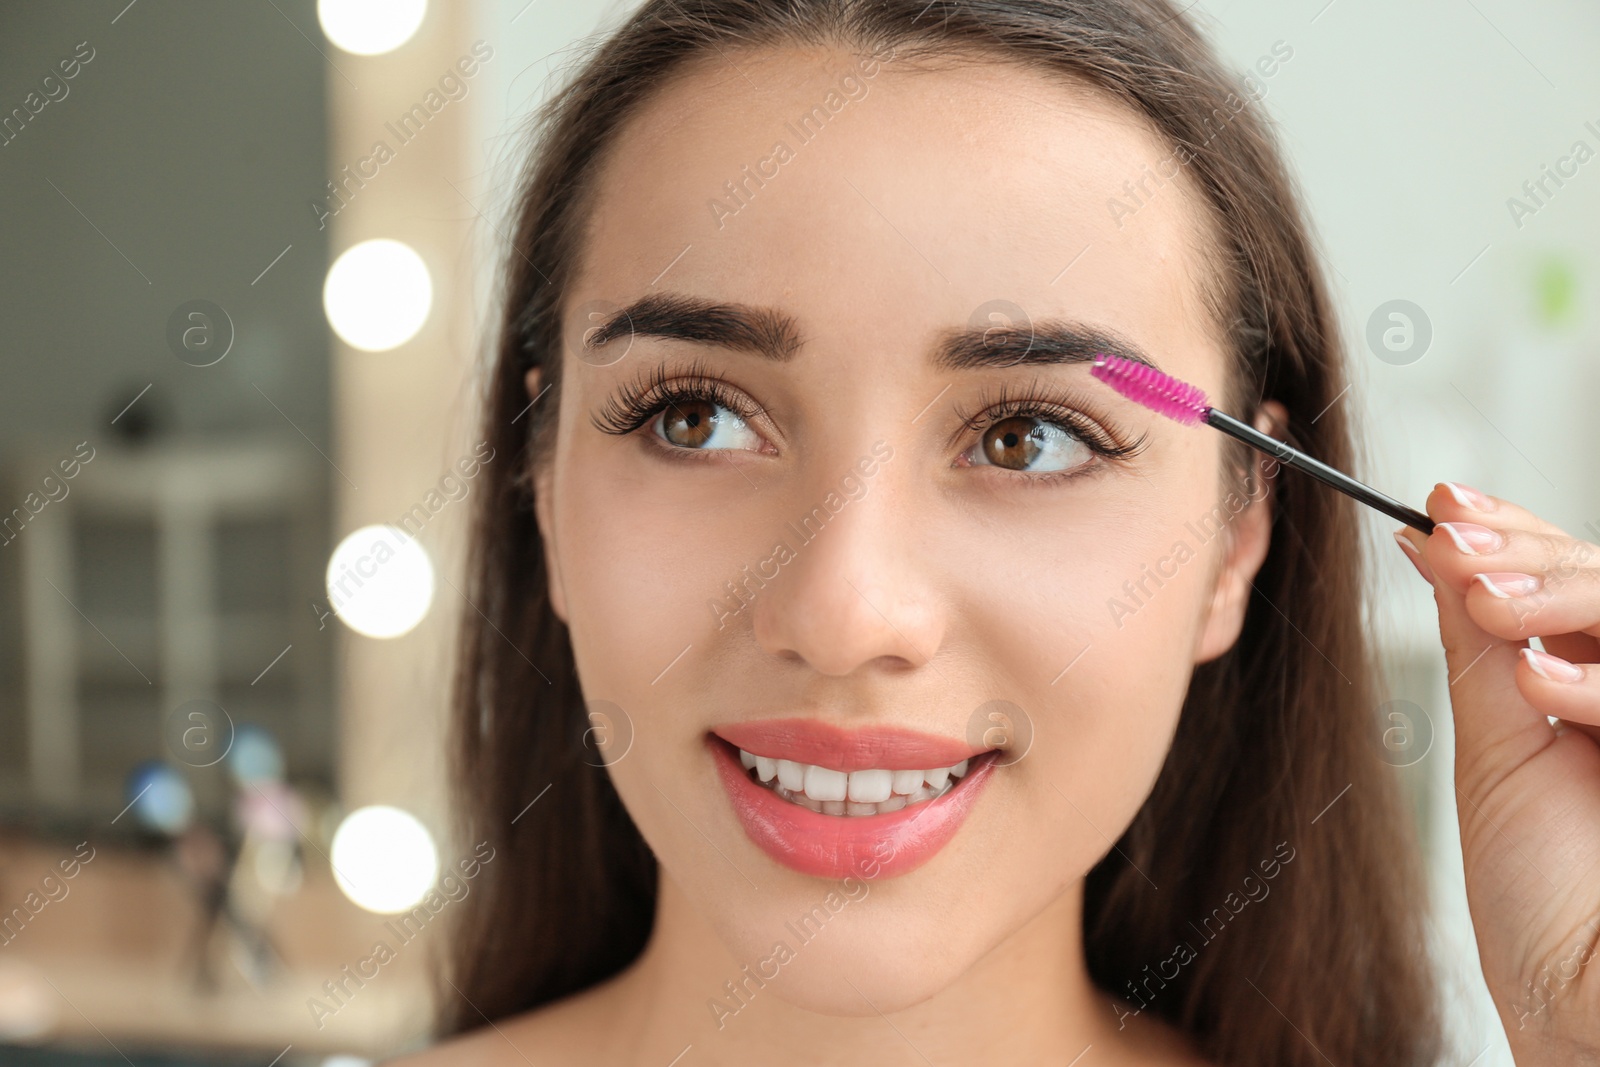 Photo of Attractive young woman applying mascara on her eyelashes against blurred background